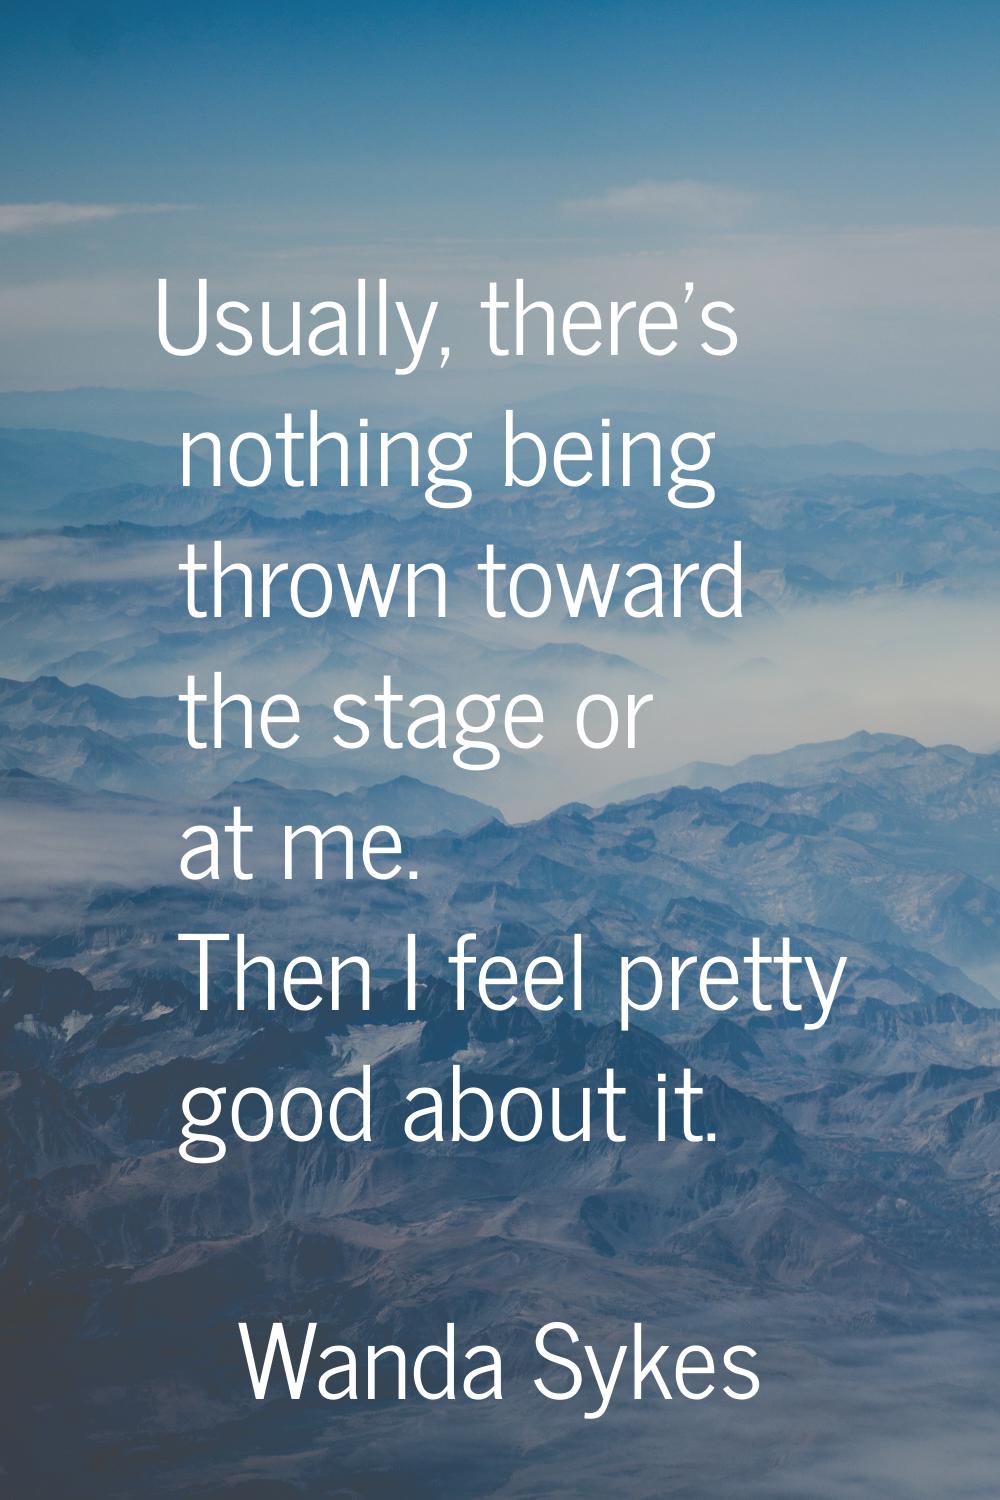 Usually, there's nothing being thrown toward the stage or at me. Then I feel pretty good about it.